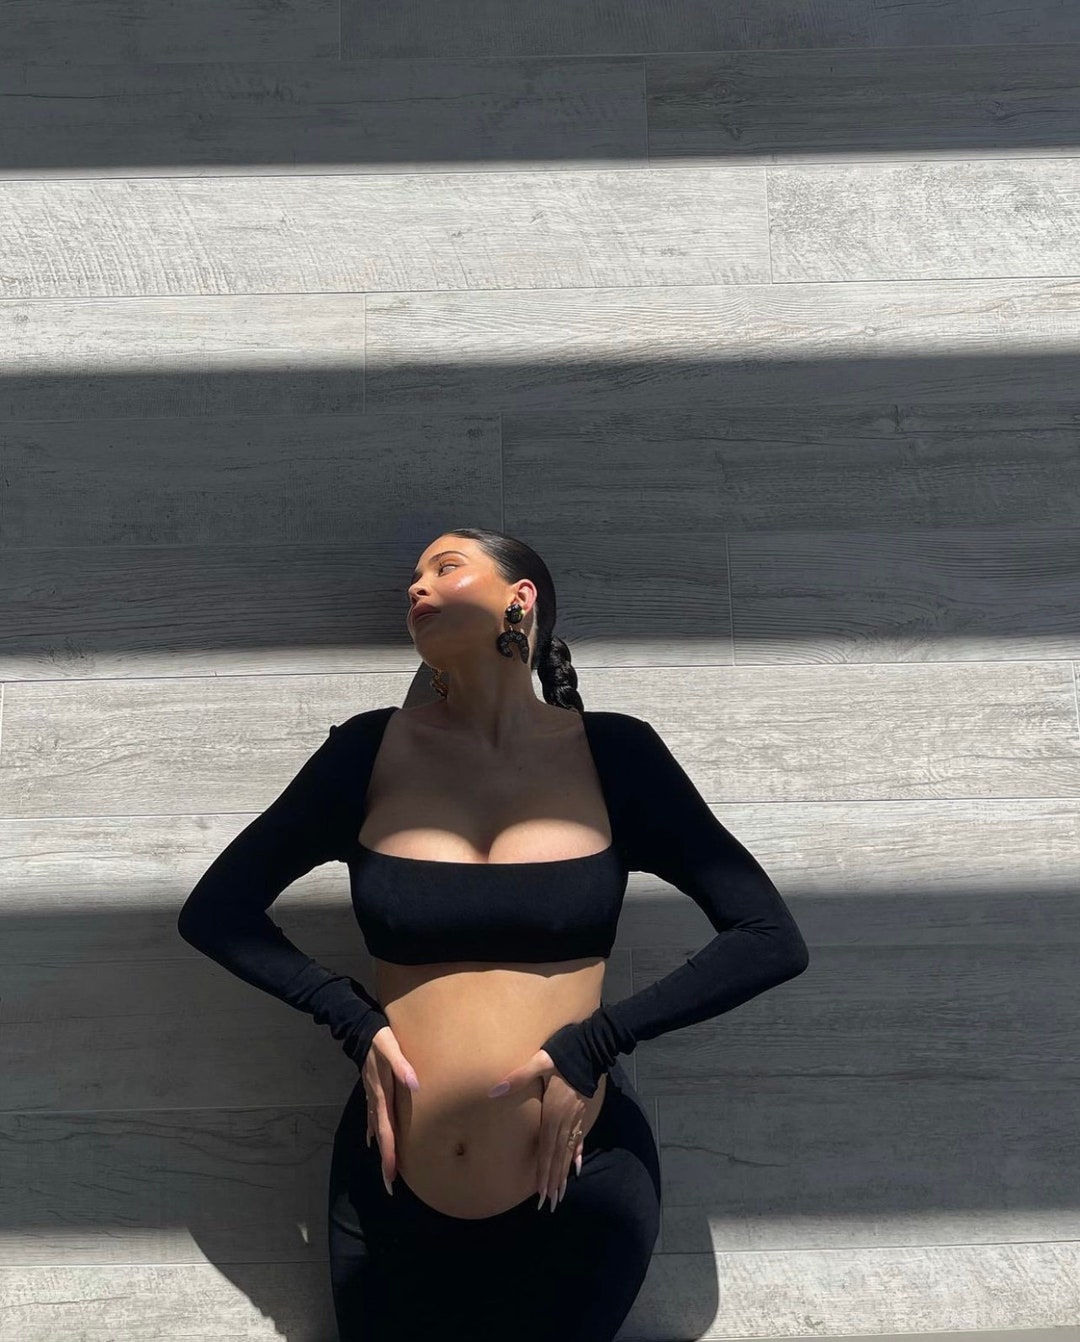 Kylie Jenner Maternity Inspired One Piece Black Cut Out Dress - Etsy